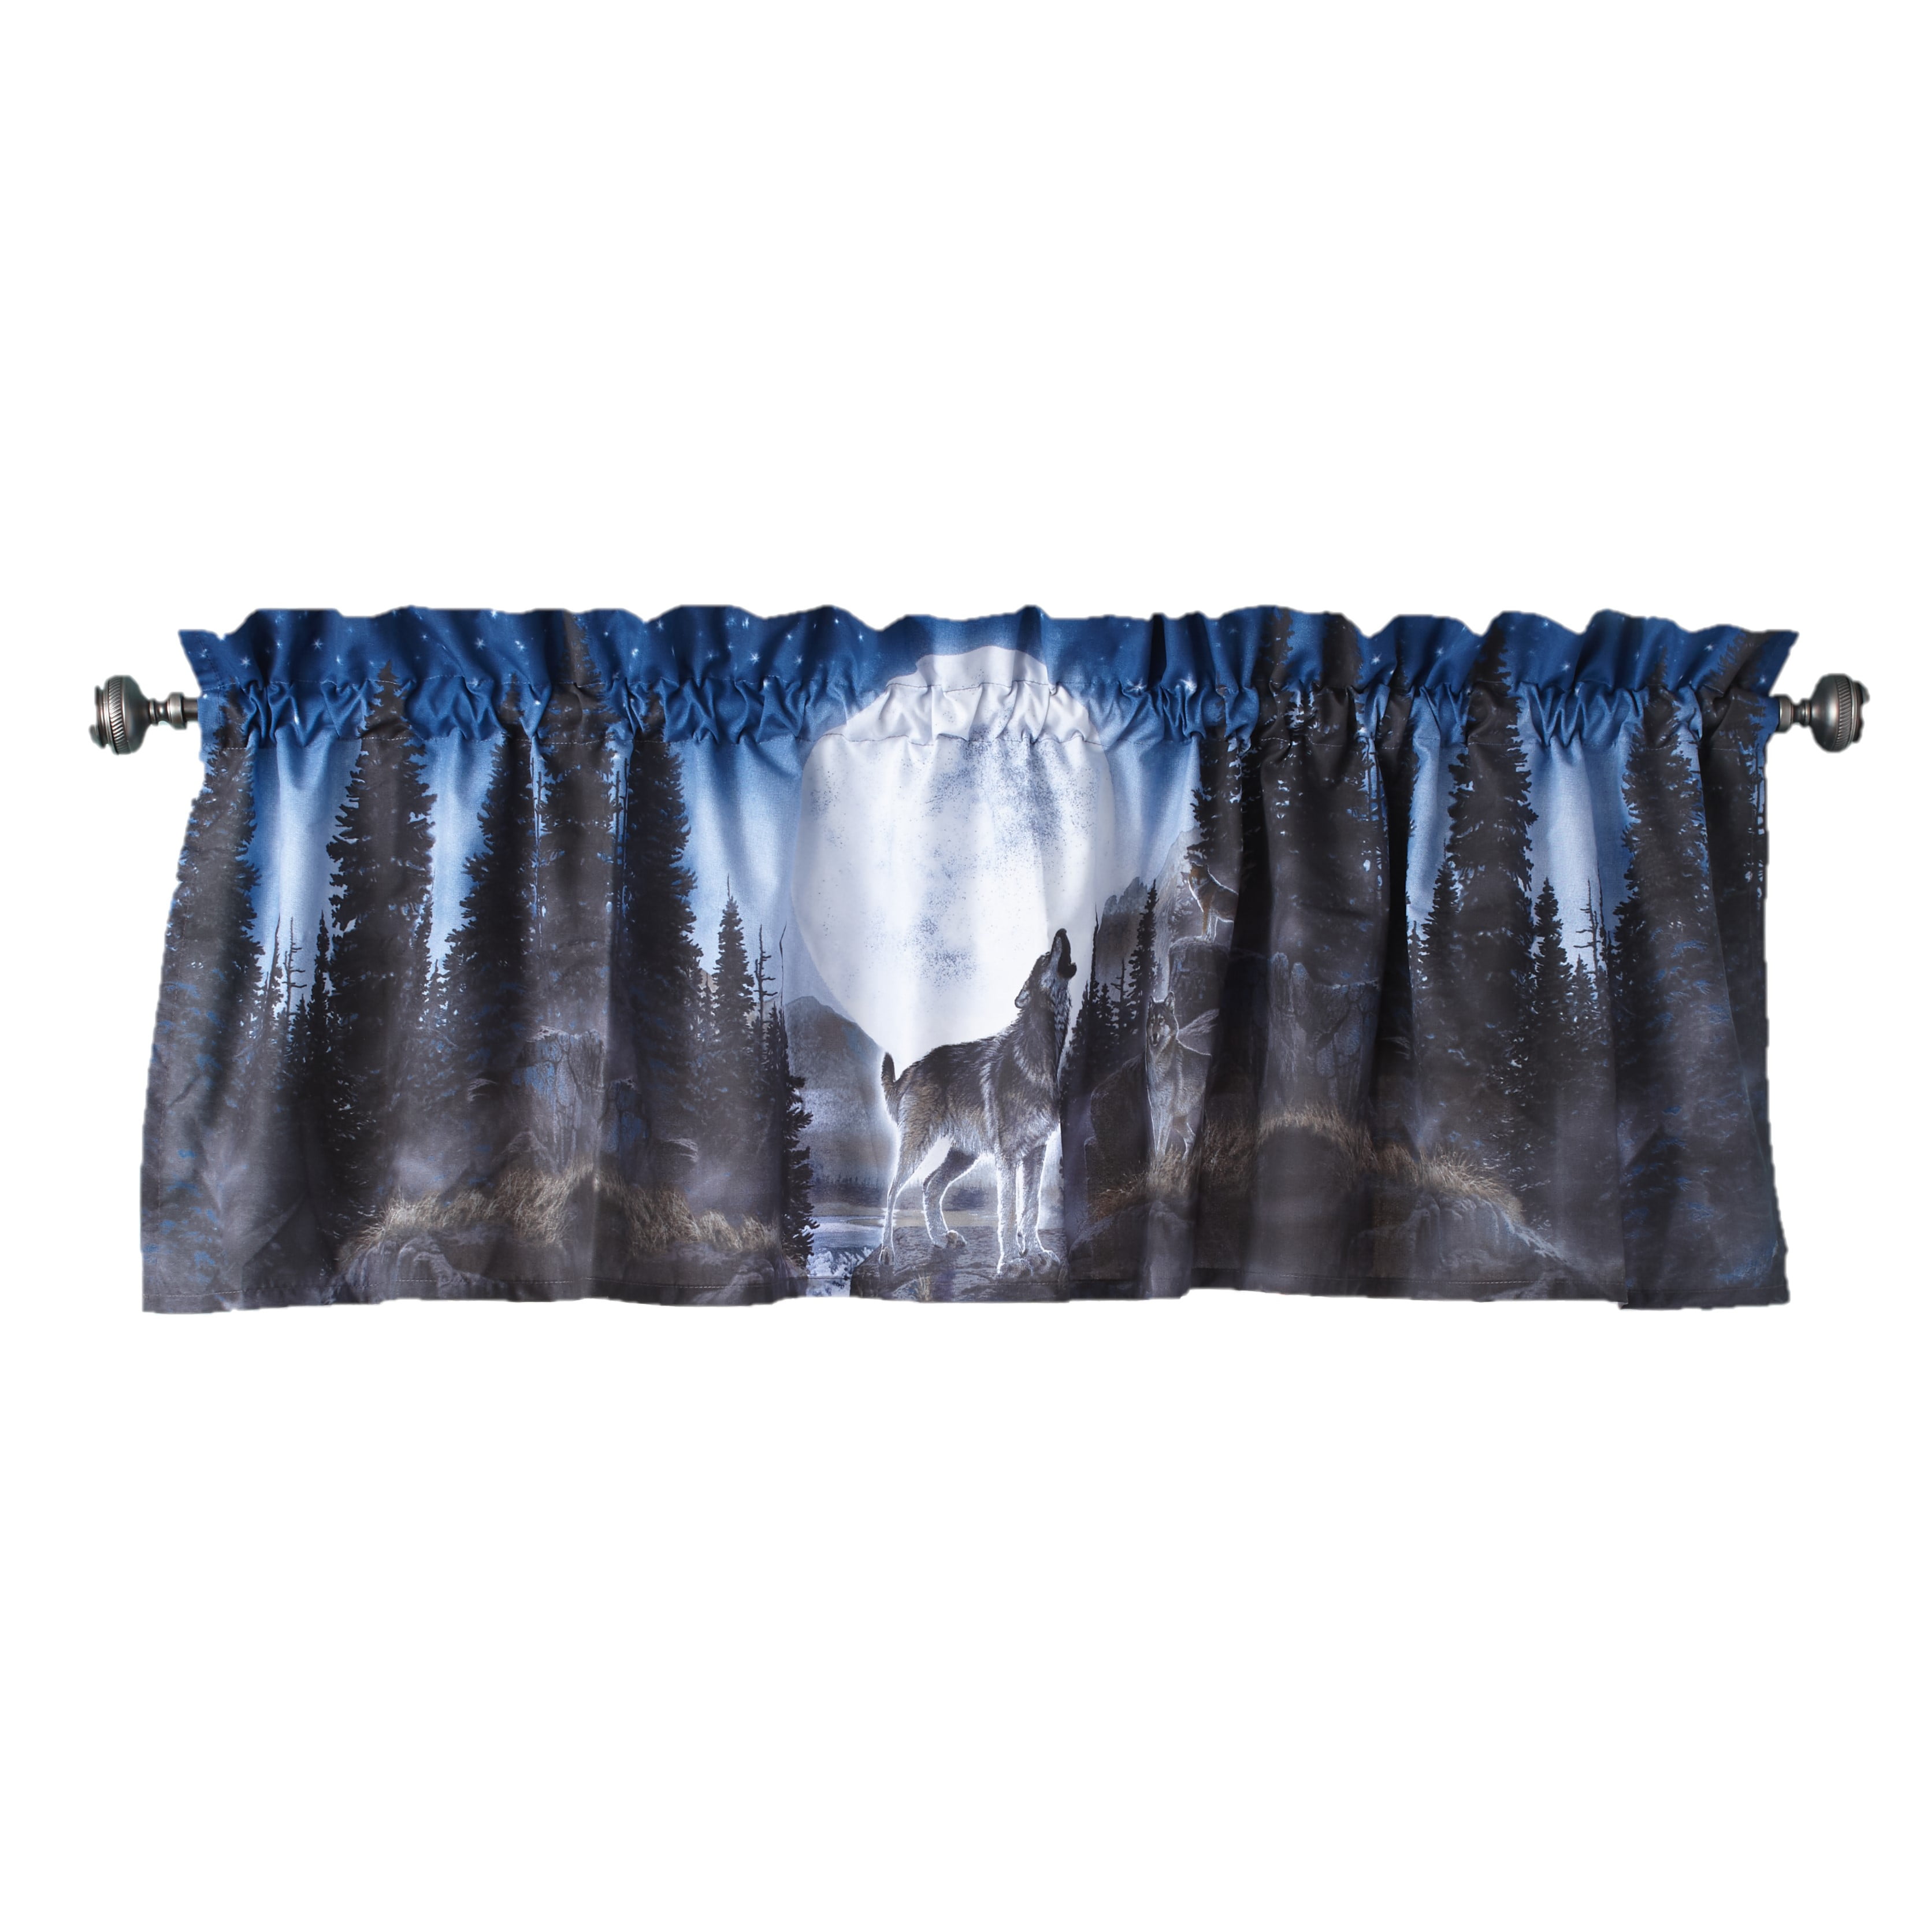 LINED VALANCE 42X15 WOLF WOLVES WINTER SNOW PACK FOREST WILDLIFE TREE ANIMAL 